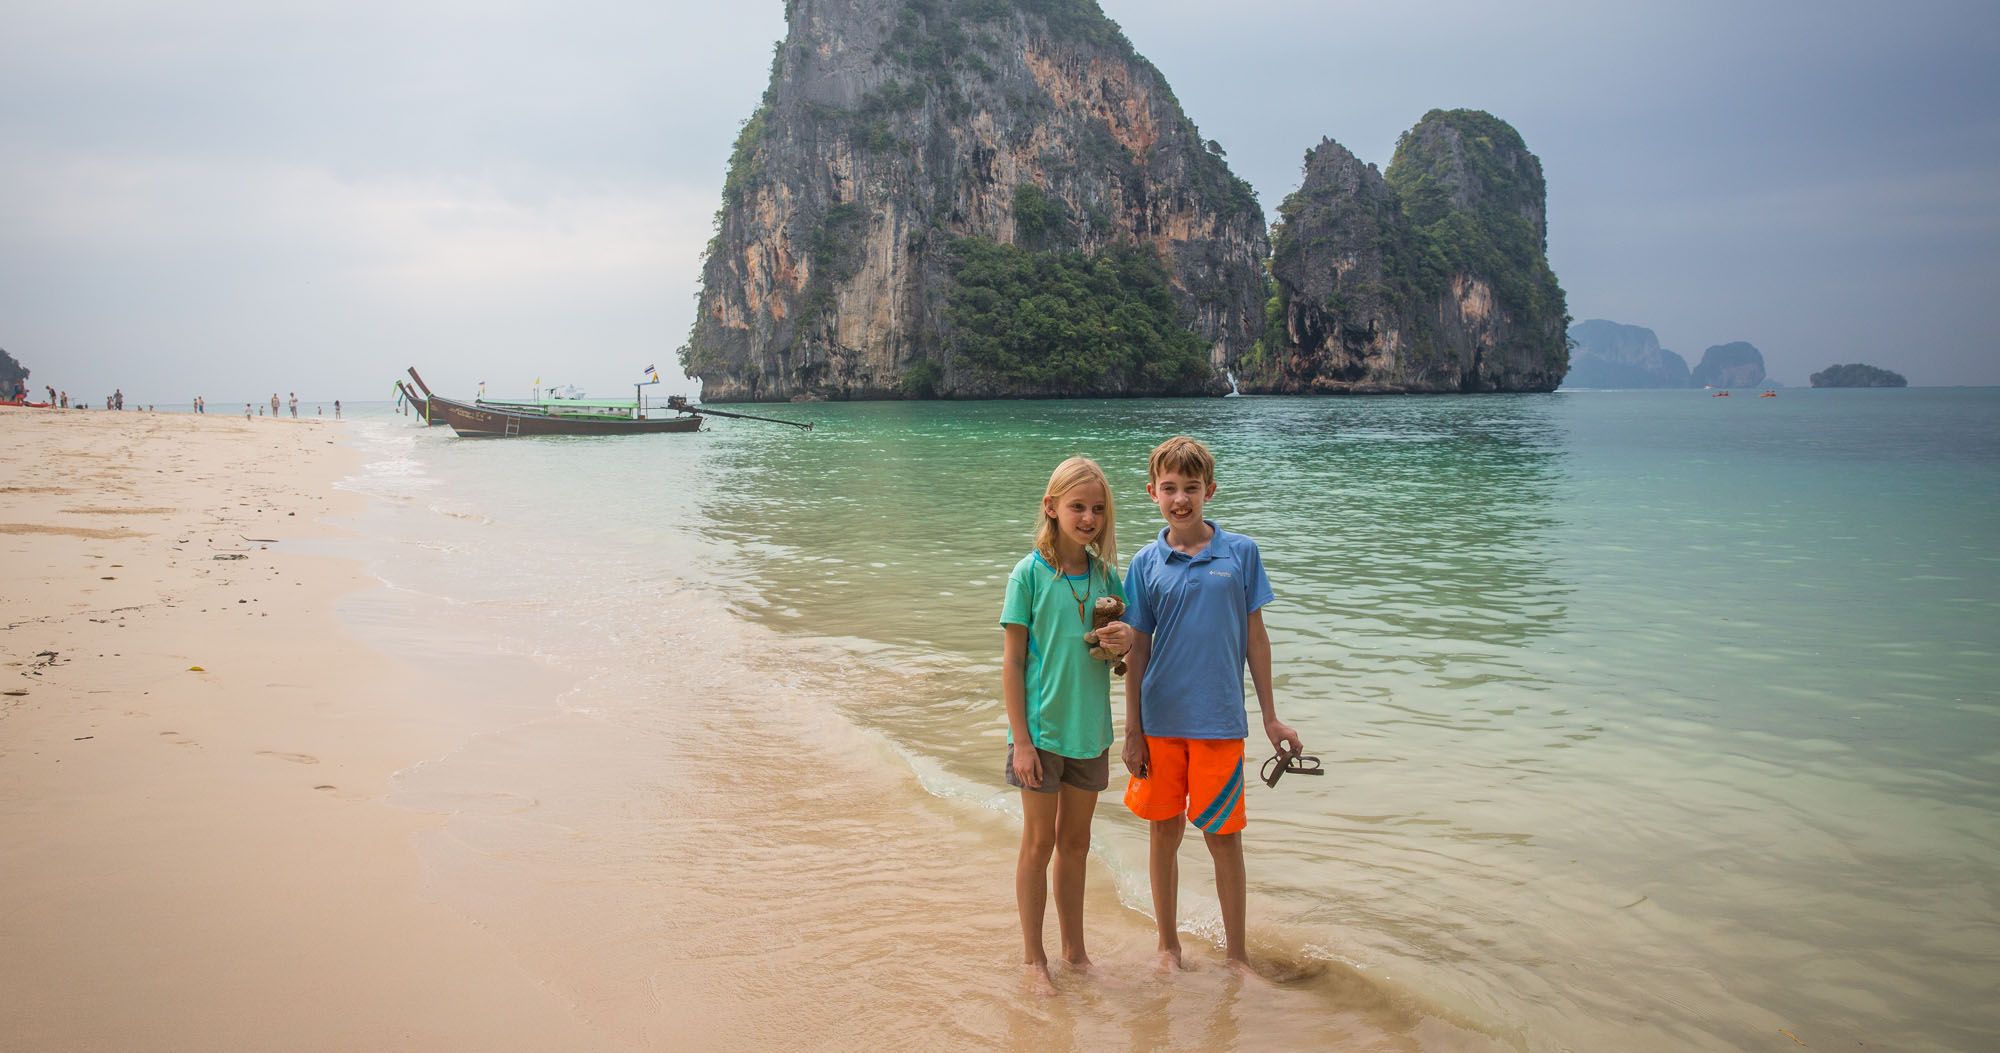 Featured image for “Favorite Photos, Favorite Moments from Krabi, Thailand”